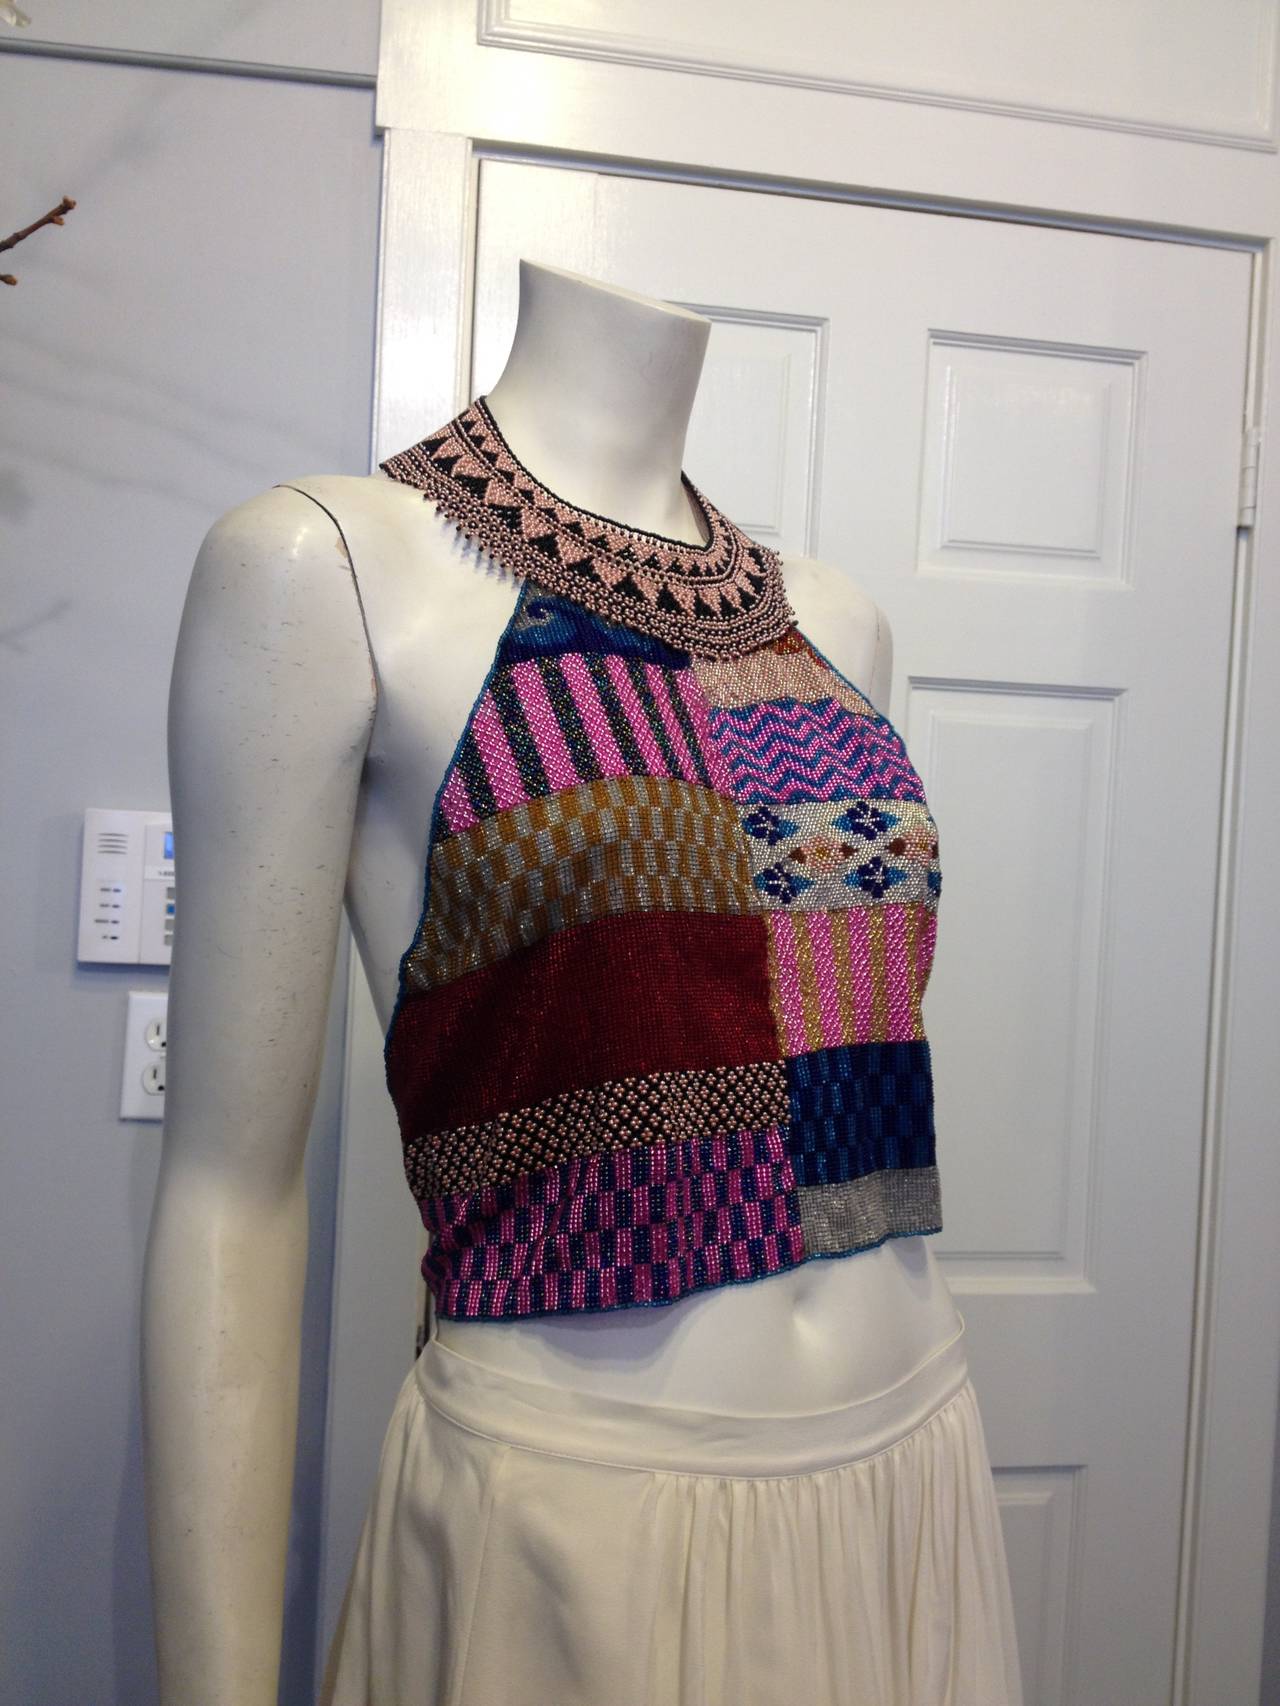 This wild  halter top is a patchwork of a gorgeous and intricate hand-beaded materials, woven in a boldly colorful pastiche of patterns. The elaborate neckline fastens at the back like a collar, while the triangle-shaped body of the piece wraps and